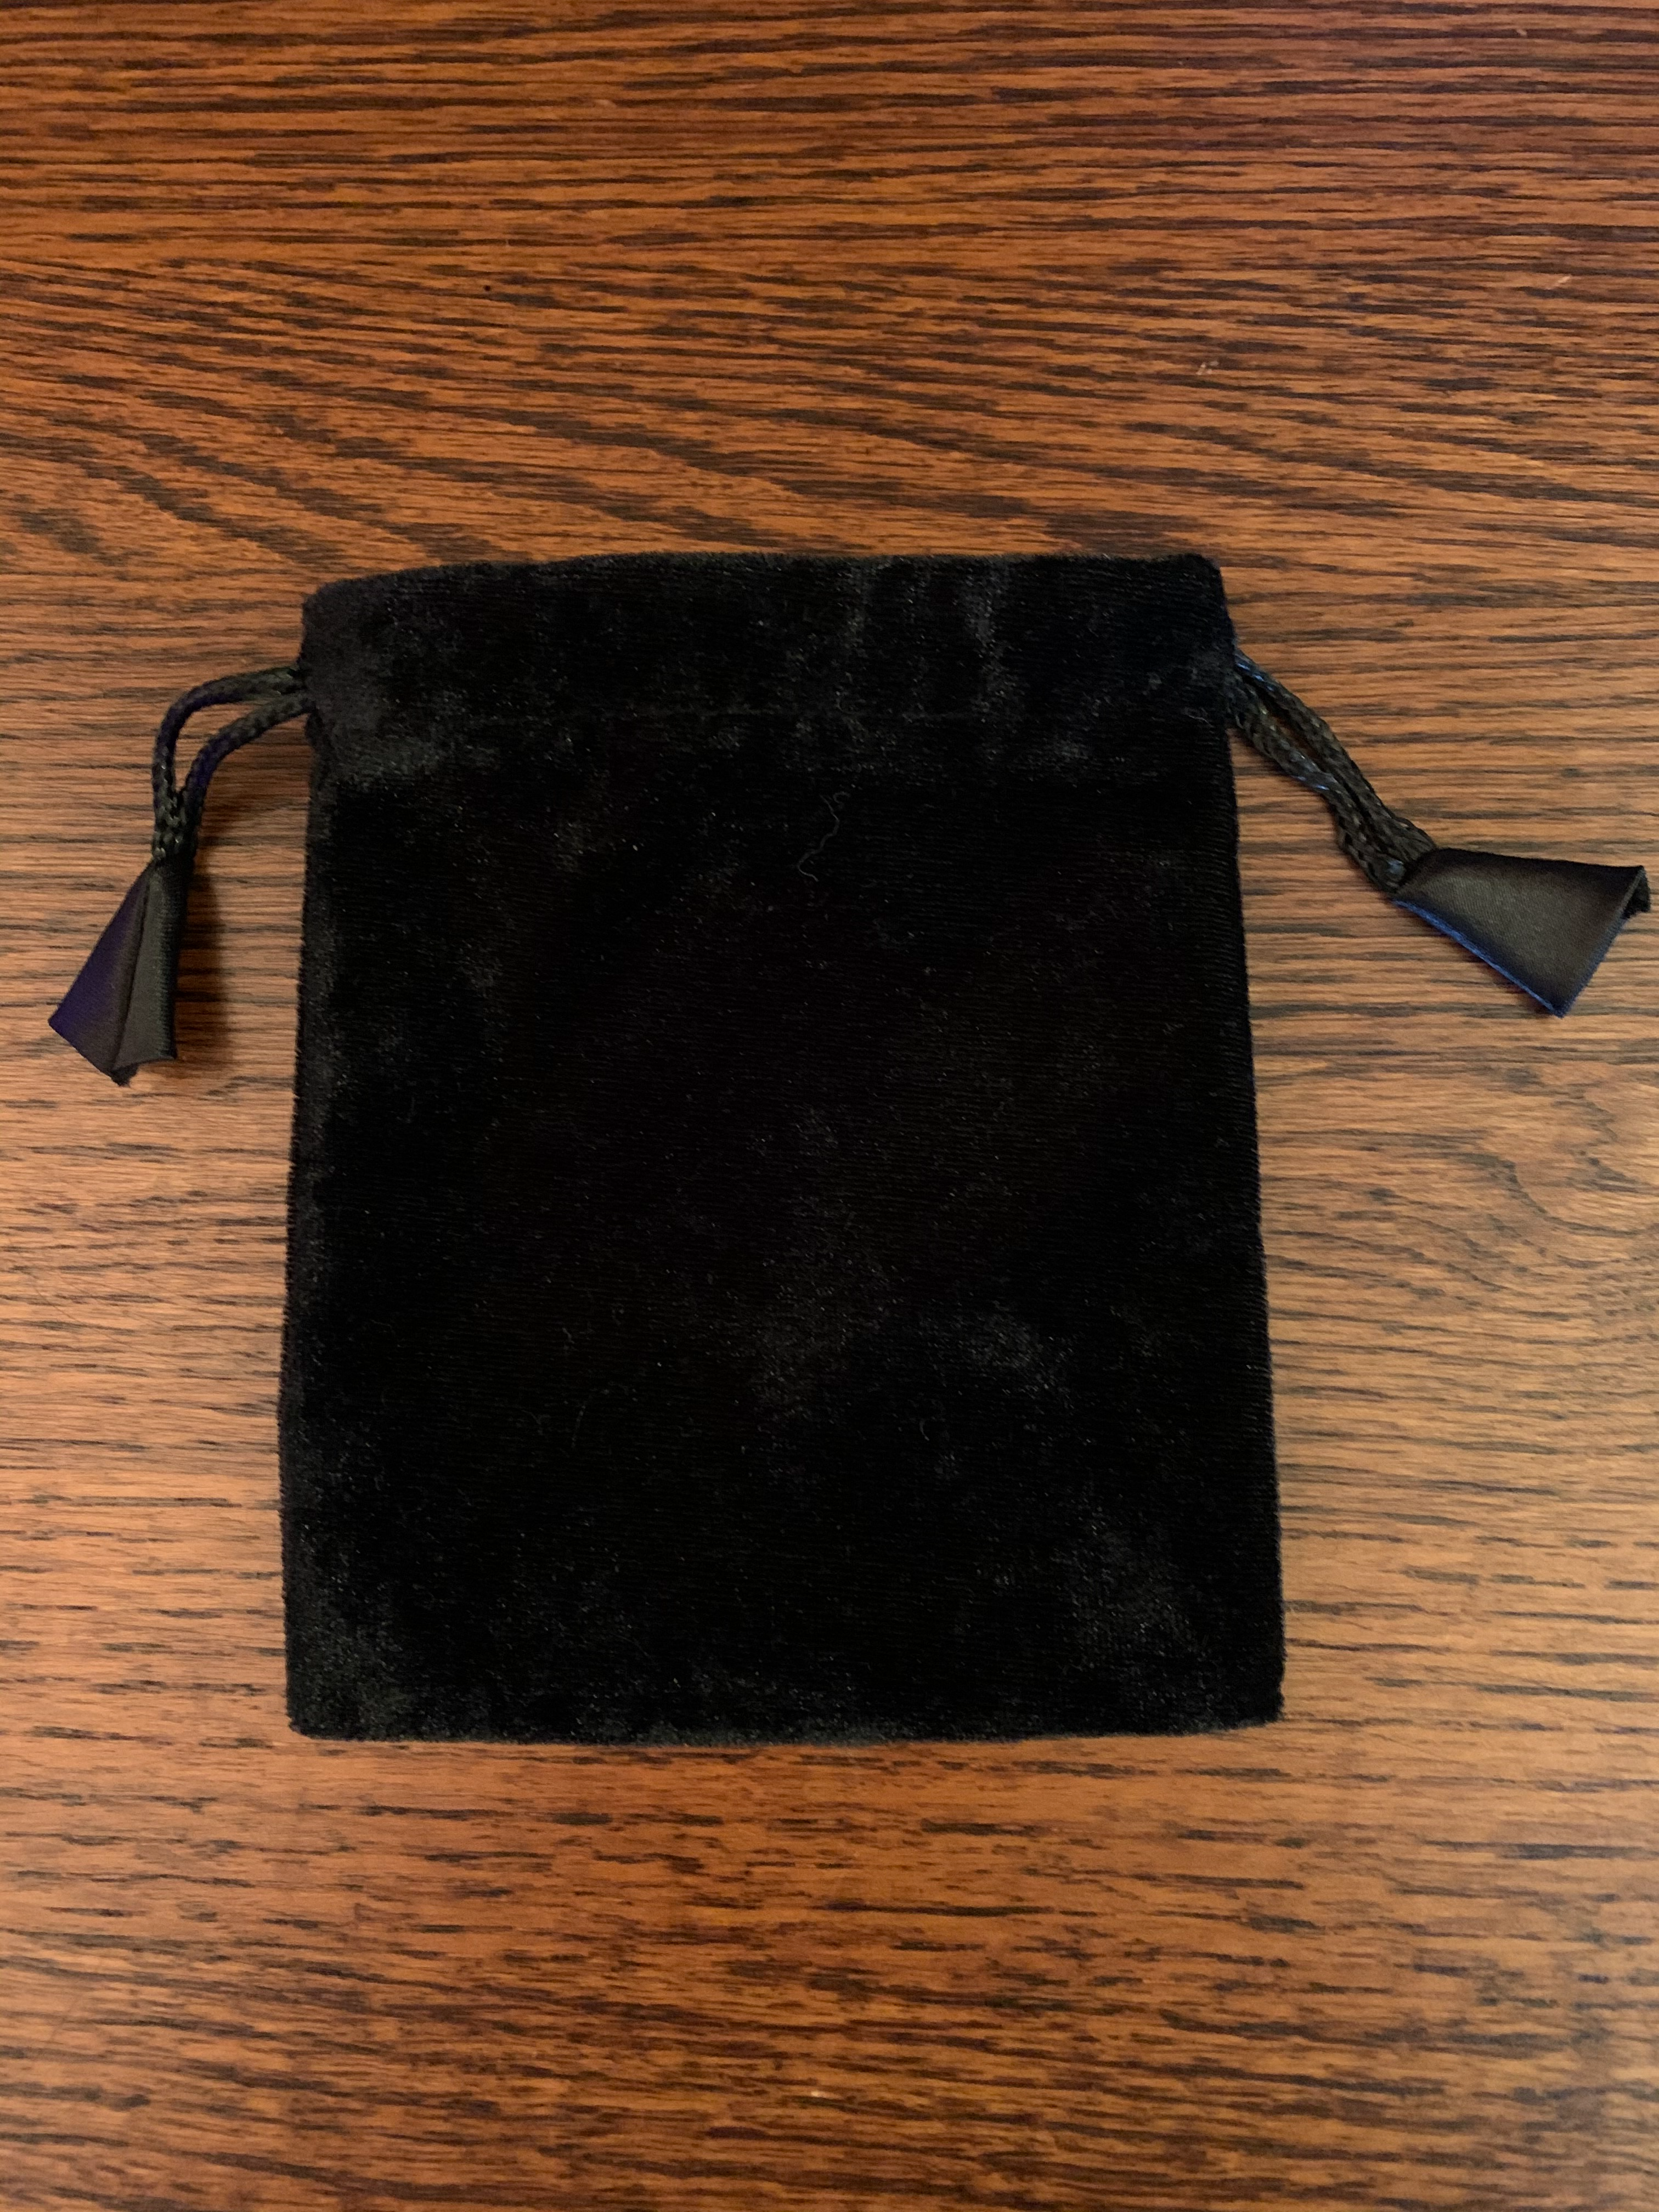 Close-up view. Plain black Velvet tarot/oracle deck bag (no design) to store cards. Drawstrings for closure. Size: 5.75"x4.75". Holds small decks only (e.g. Shamanic Healing Oracle Cards, Original Angel Cards, etc.). Can also be used to store & protect small to medium size crystals, gemstones or other precious items.  Cost is $4.99